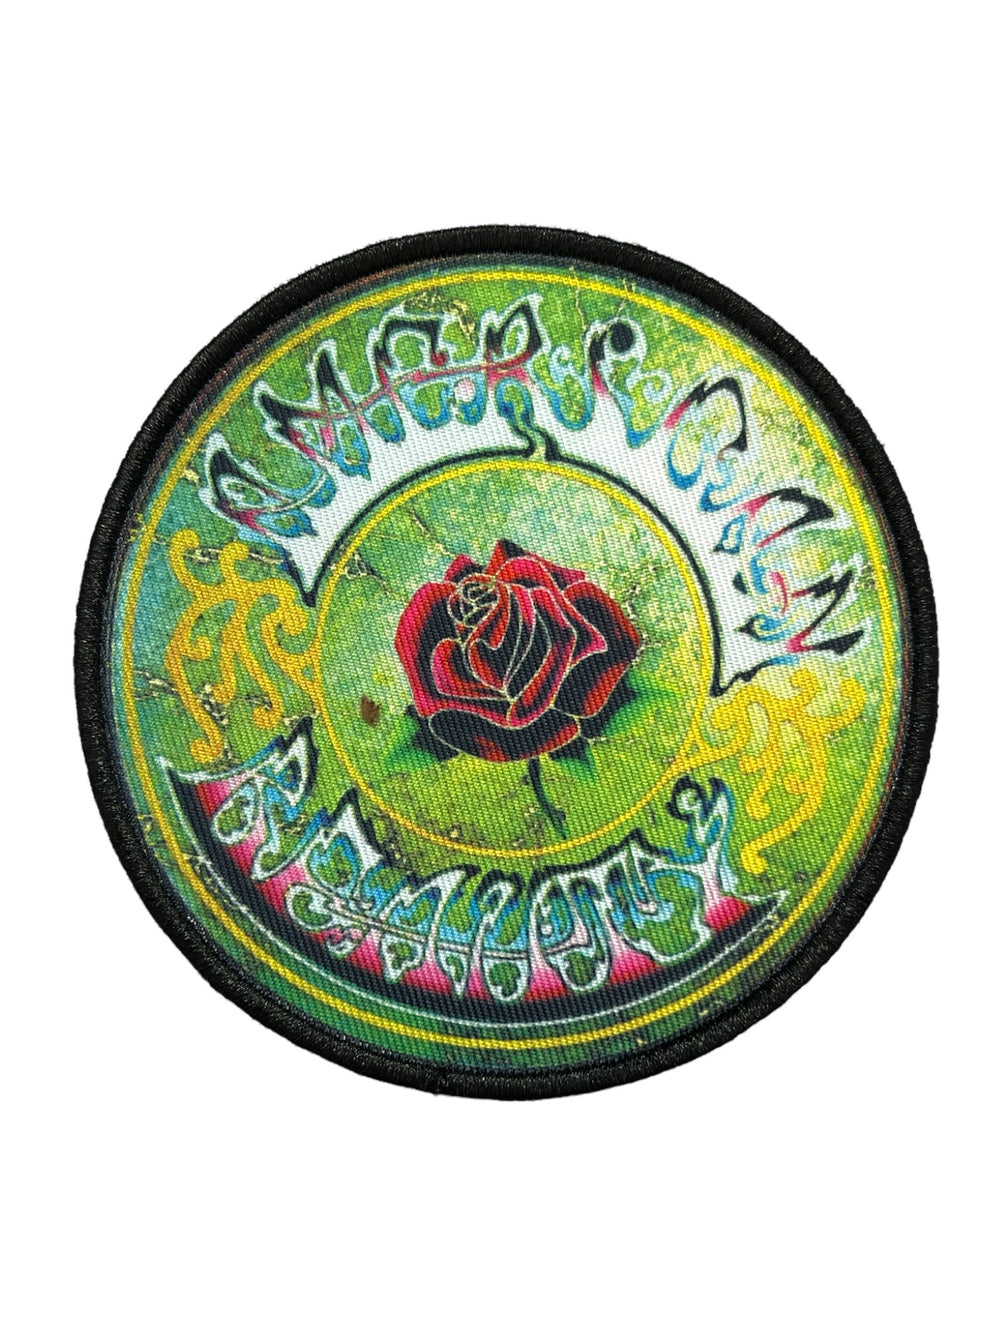 Grateful Dead American Beauty Official Woven Patch Brand New